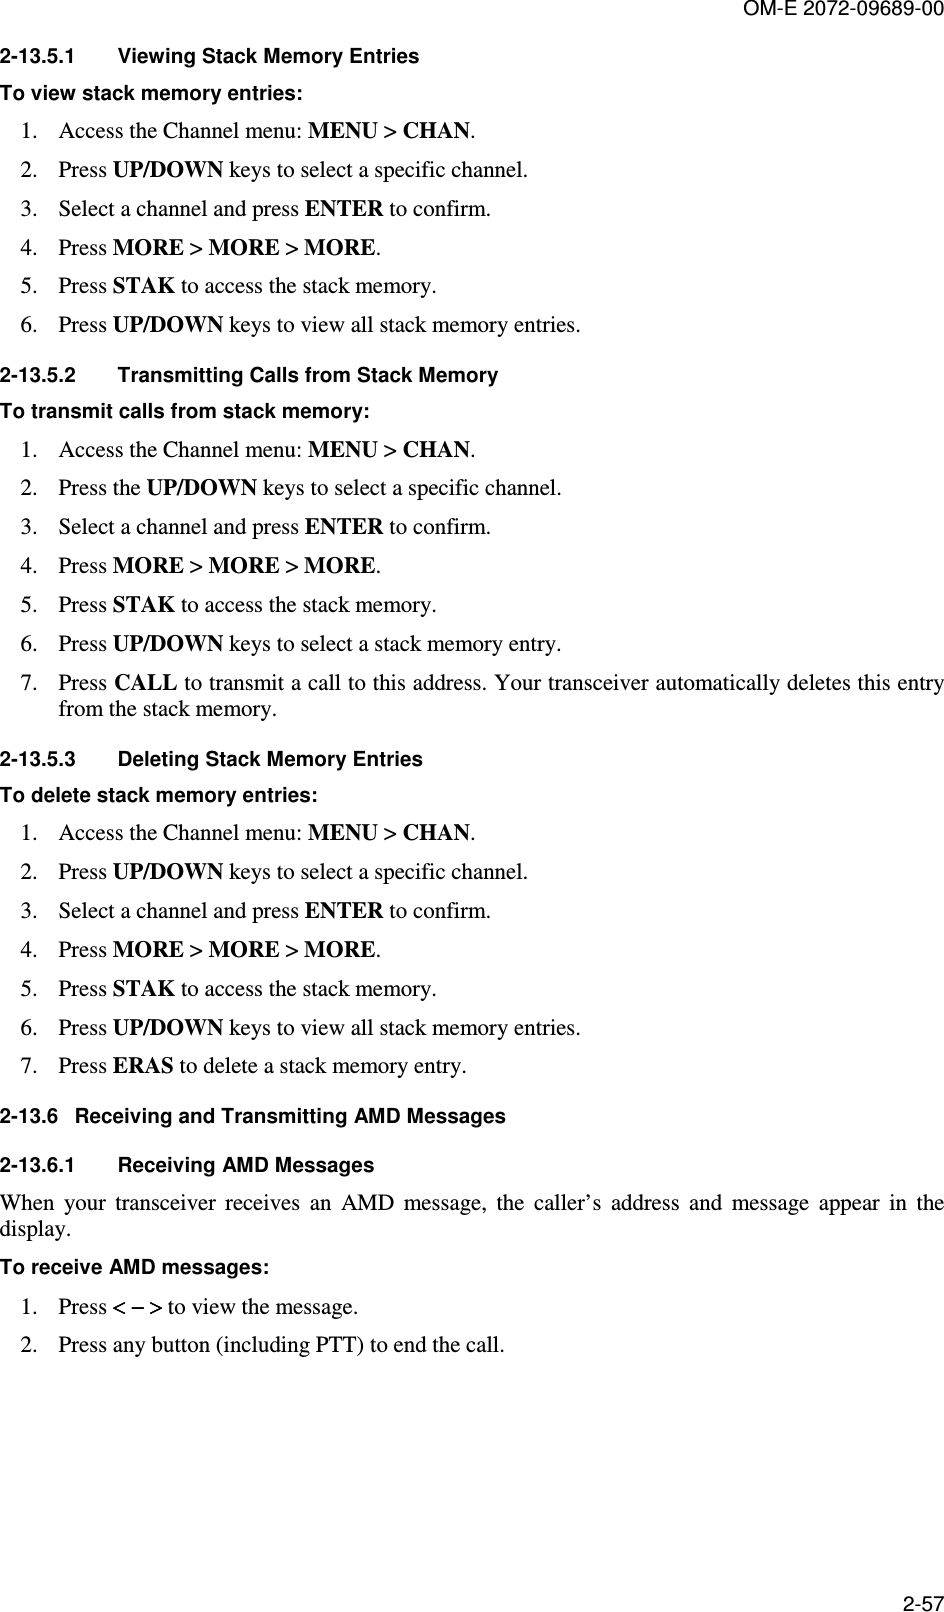 OM-E 2072-09689-00 2-57 2-13.5.1  Viewing Stack Memory Entries To view stack memory entries: 1. Access the Channel menu: MENU &gt; CHAN.  2. Press UP/DOWN keys to select a specific channel.  3. Select a channel and press ENTER to confirm.  4. Press MORE &gt; MORE &gt; MORE.  5. Press STAK to access the stack memory. 6. Press UP/DOWN keys to view all stack memory entries. 2-13.5.2  Transmitting Calls from Stack Memory To transmit calls from stack memory: 1. Access the Channel menu: MENU &gt; CHAN.  2. Press the UP/DOWN keys to select a specific channel.  3. Select a channel and press ENTER to confirm.  4. Press MORE &gt; MORE &gt; MORE.  5. Press STAK to access the stack memory.  6. Press UP/DOWN keys to select a stack memory entry.  7. Press CALL to transmit a call to this address. Your transceiver automatically deletes this entry from the stack memory. 2-13.5.3  Deleting Stack Memory Entries To delete stack memory entries: 1. Access the Channel menu: MENU &gt; CHAN.  2. Press UP/DOWN keys to select a specific channel.  3. Select a channel and press ENTER to confirm.  4. Press MORE &gt; MORE &gt; MORE.  5. Press STAK to access the stack memory.  6. Press UP/DOWN keys to view all stack memory entries.  7. Press ERAS to delete a stack memory entry. 2-13.6  Receiving and Transmitting AMD Messages  2-13.6.1  Receiving AMD Messages When  your  transceiver  receives  an  AMD  message,  the  caller’s  address  and  message  appear  in  the display.  To receive AMD messages: 1. Press &lt; − &gt;&lt; − &gt;&lt; − &gt;&lt; − &gt; to view the message.  2. Press any button (including PTT) to end the call. 